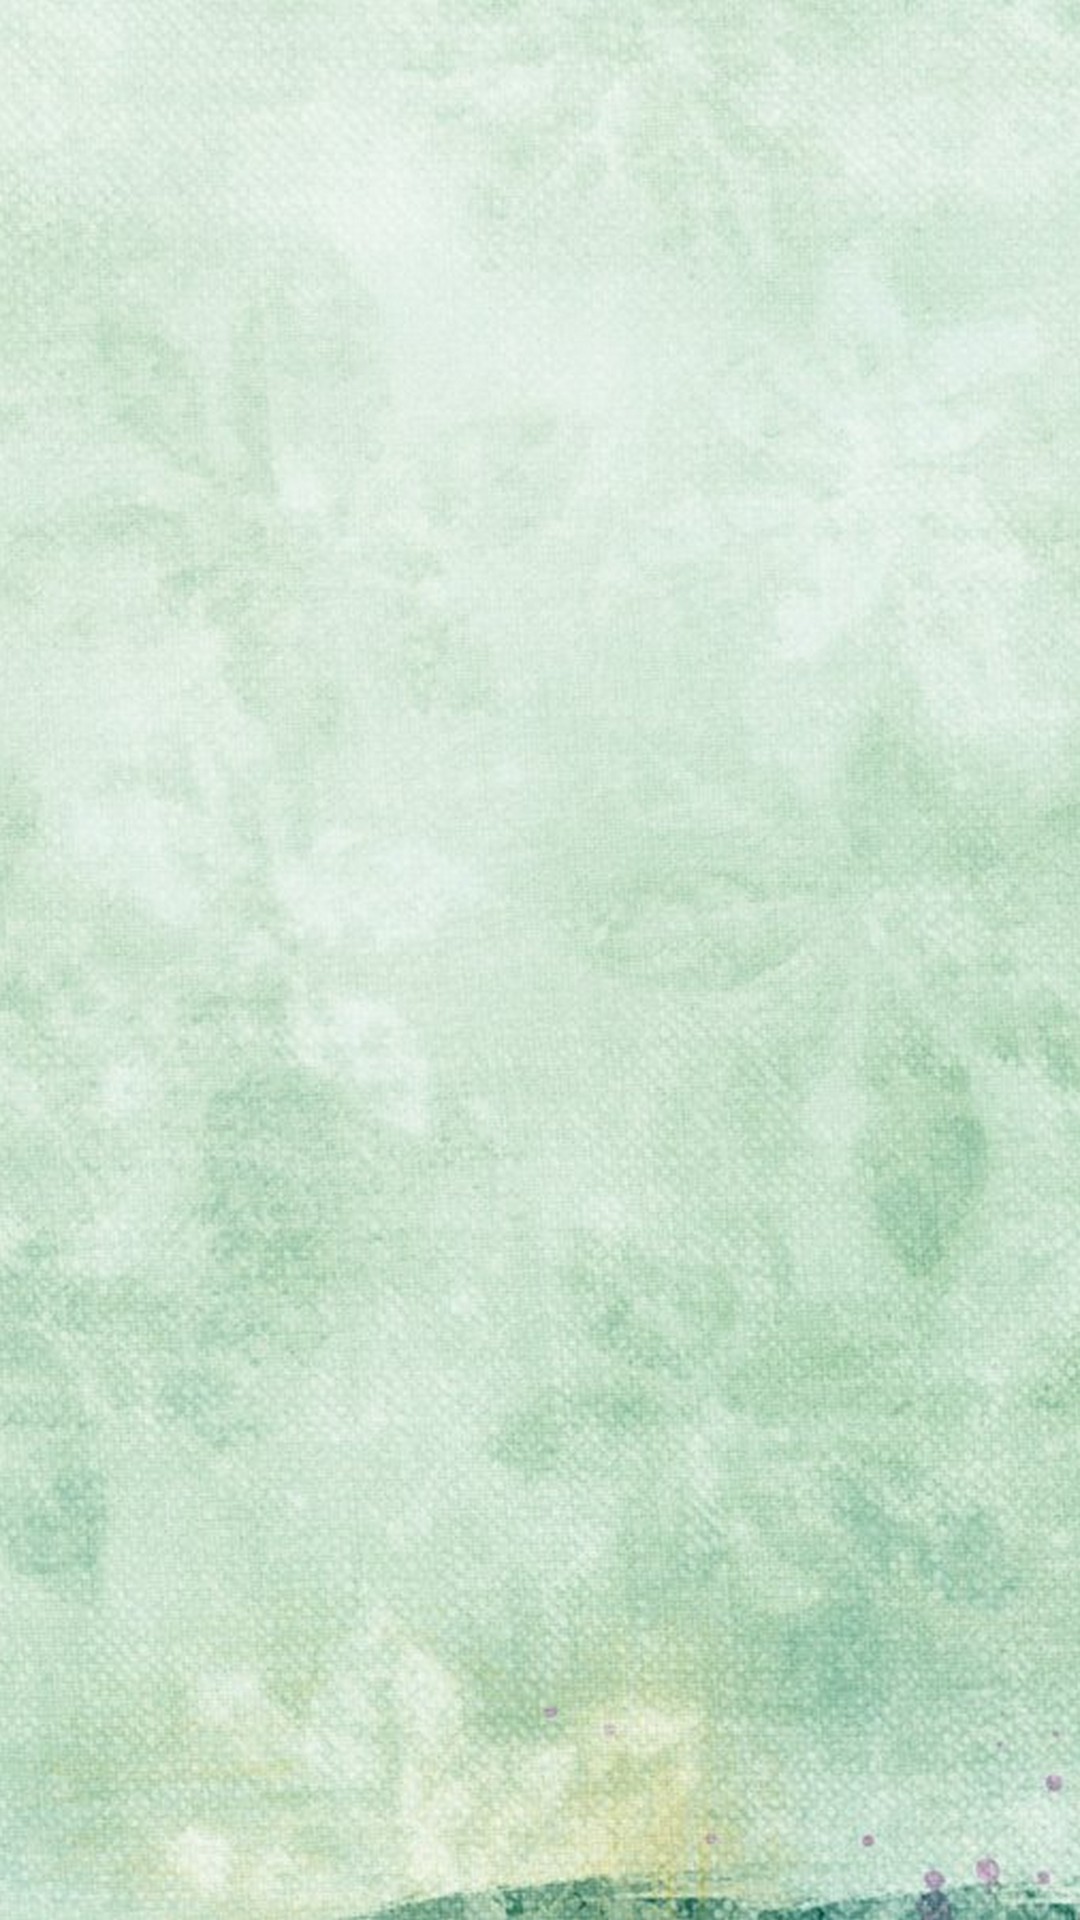 Mint Green Wallpaper For Android with resolution 1080X1920 pixel. You can make this wallpaper for your Android backgrounds, Tablet, Smartphones Screensavers and Mobile Phone Lock Screen